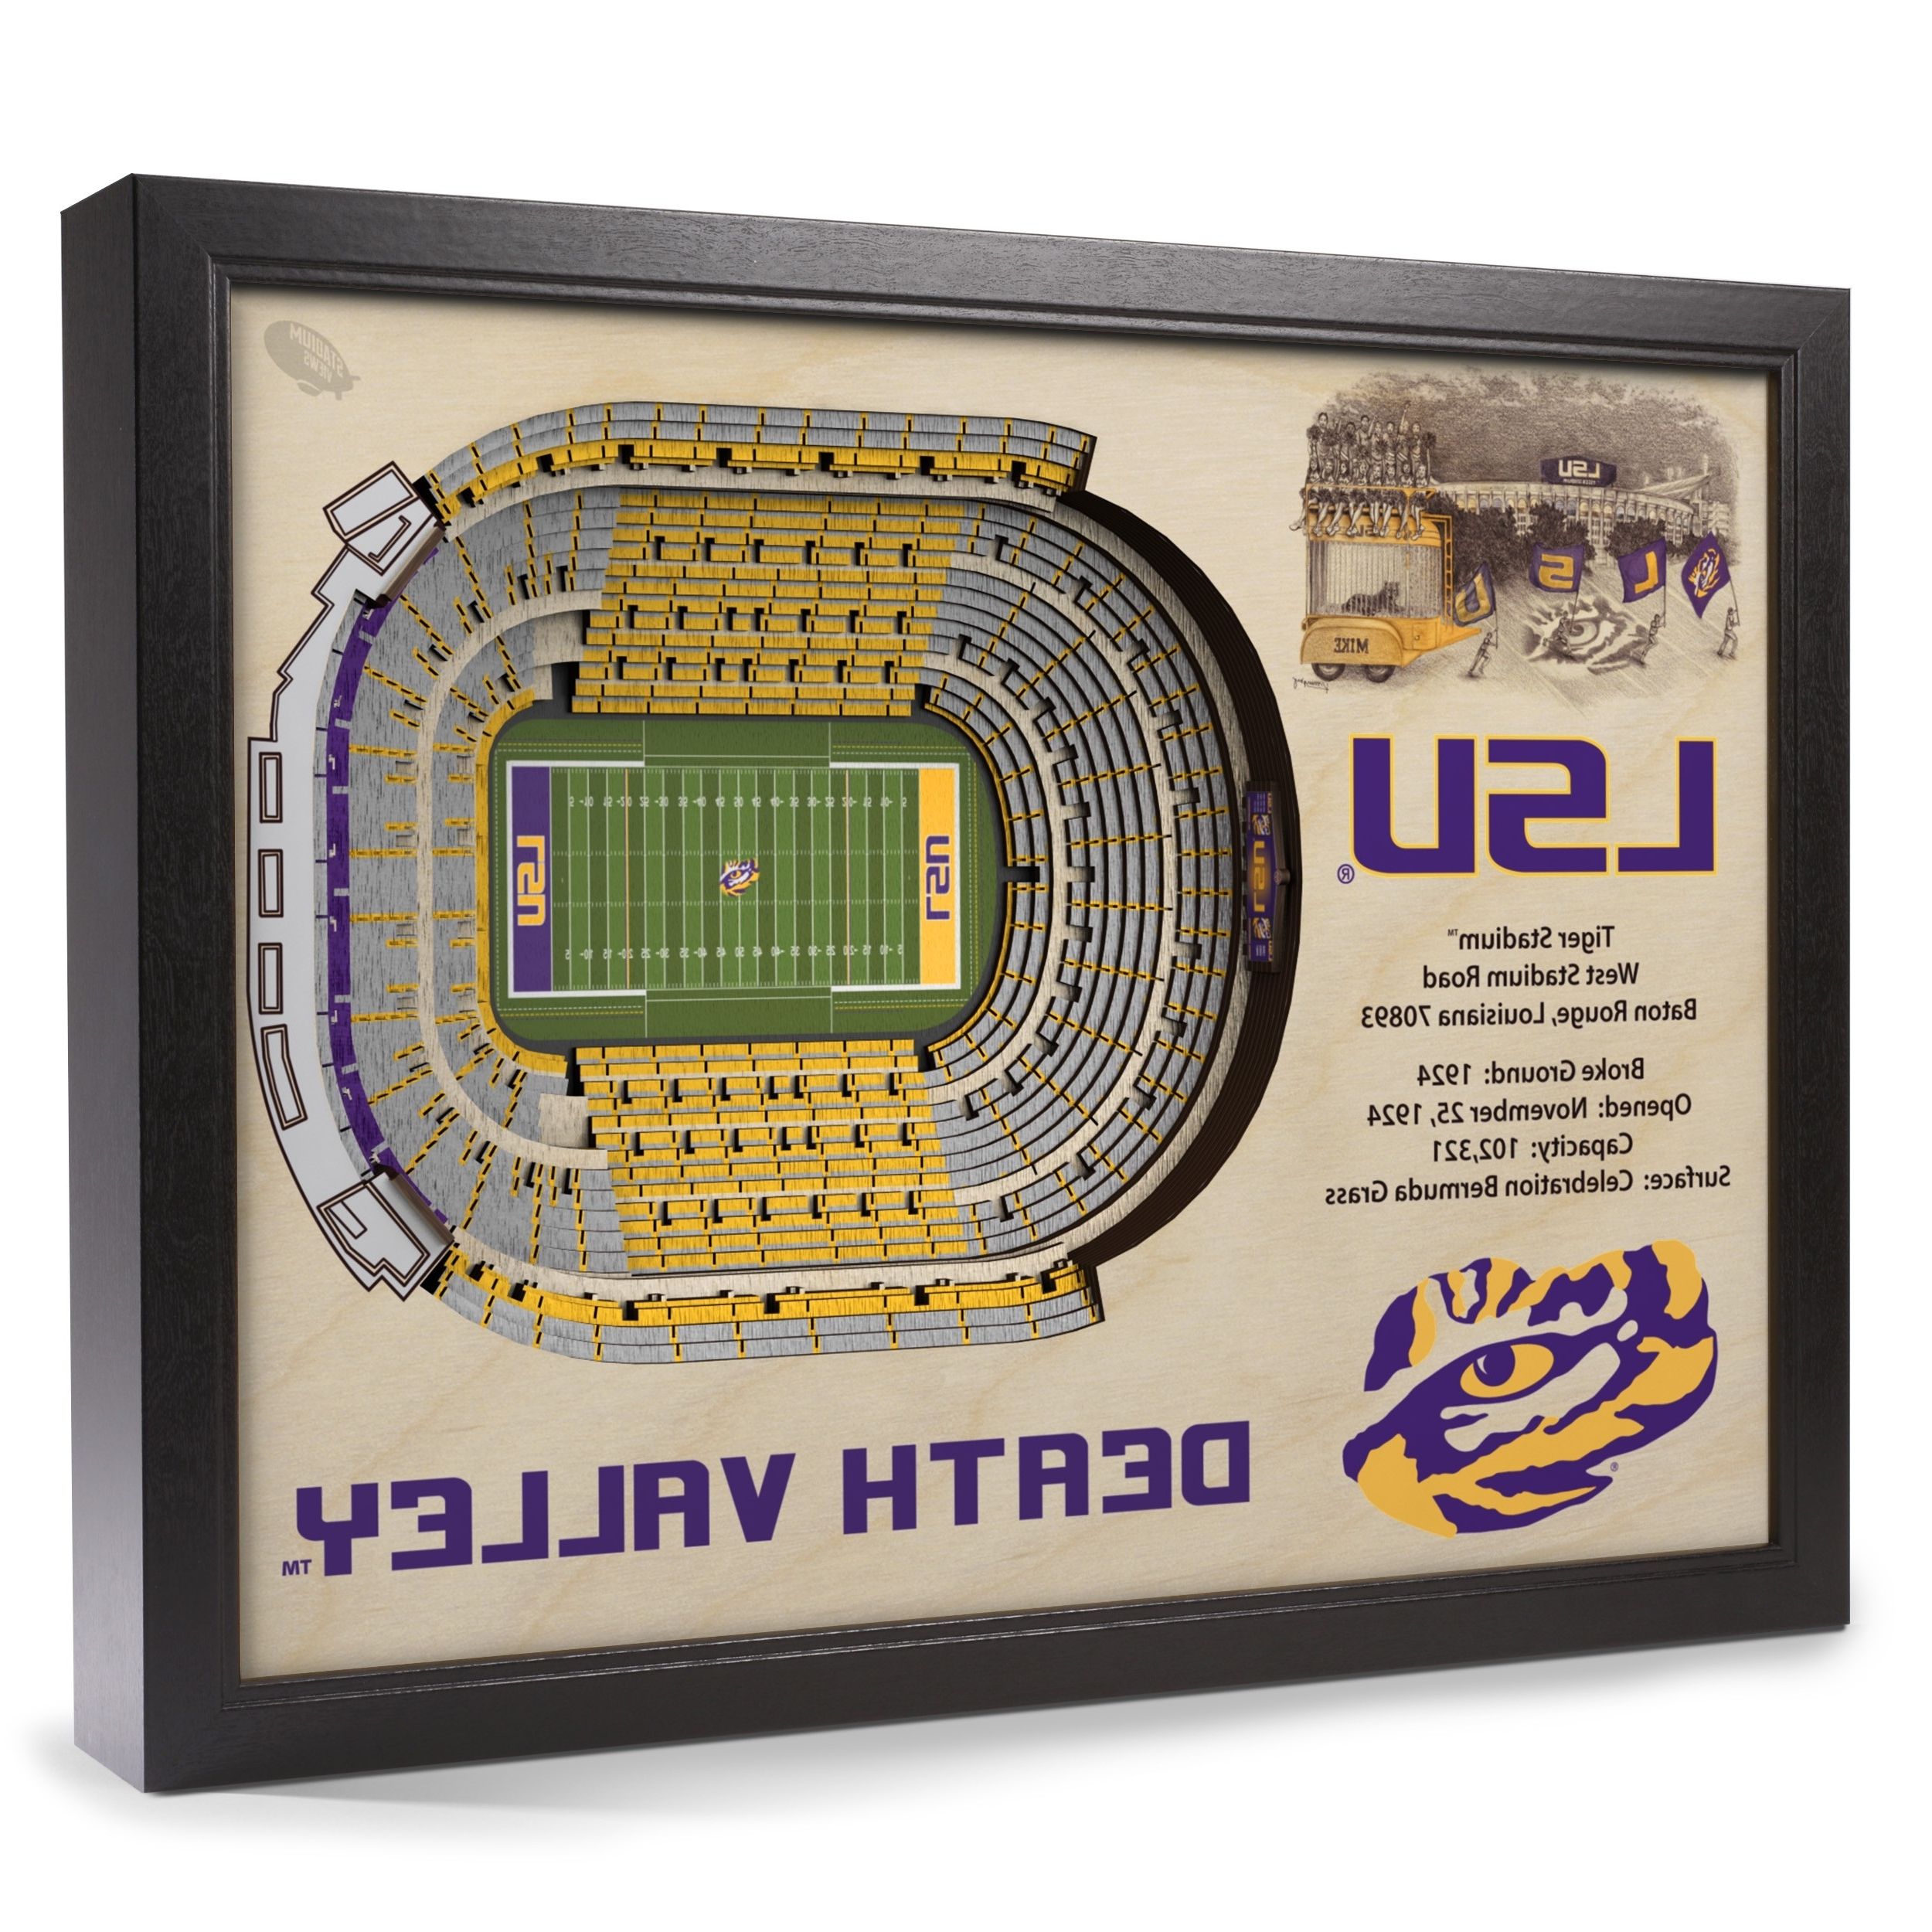 Fashionable Lsu Wall Art With Regard To Lsu Tigers Stadiumview Wall Art – Tiger Stadium 3 D Reproduction (View 9 of 15)